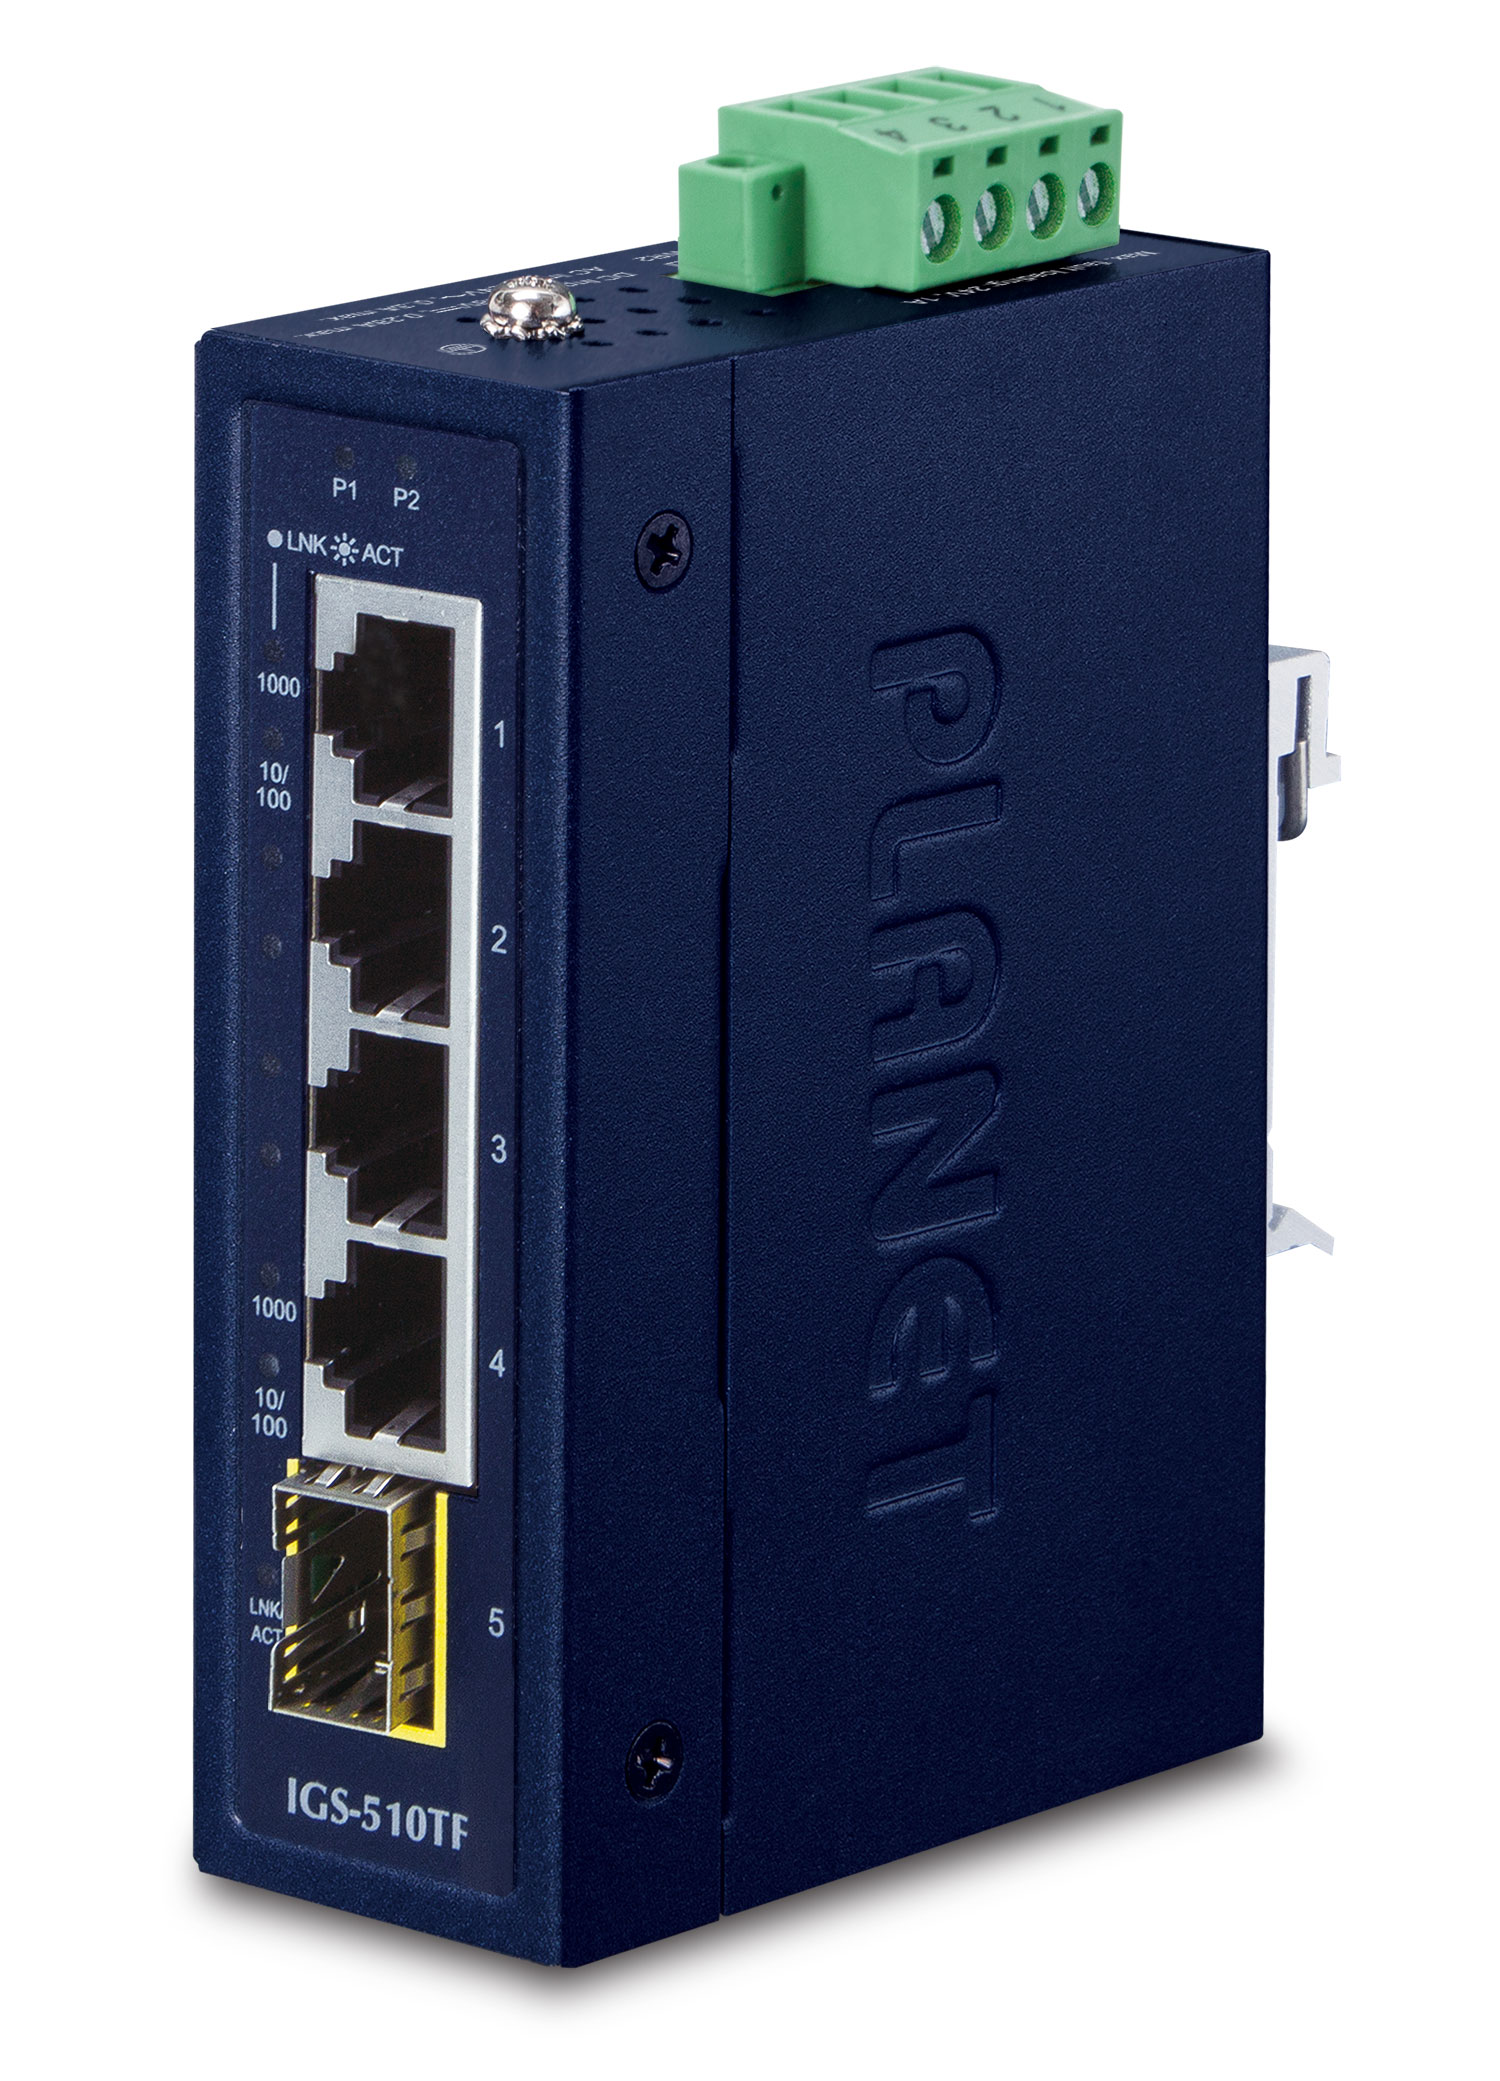 【IGS-510TF】Industrial Compact 4-Port 10/100/1000T + 1-Port 100/1000X SFP Gigabit Ethernet Switch